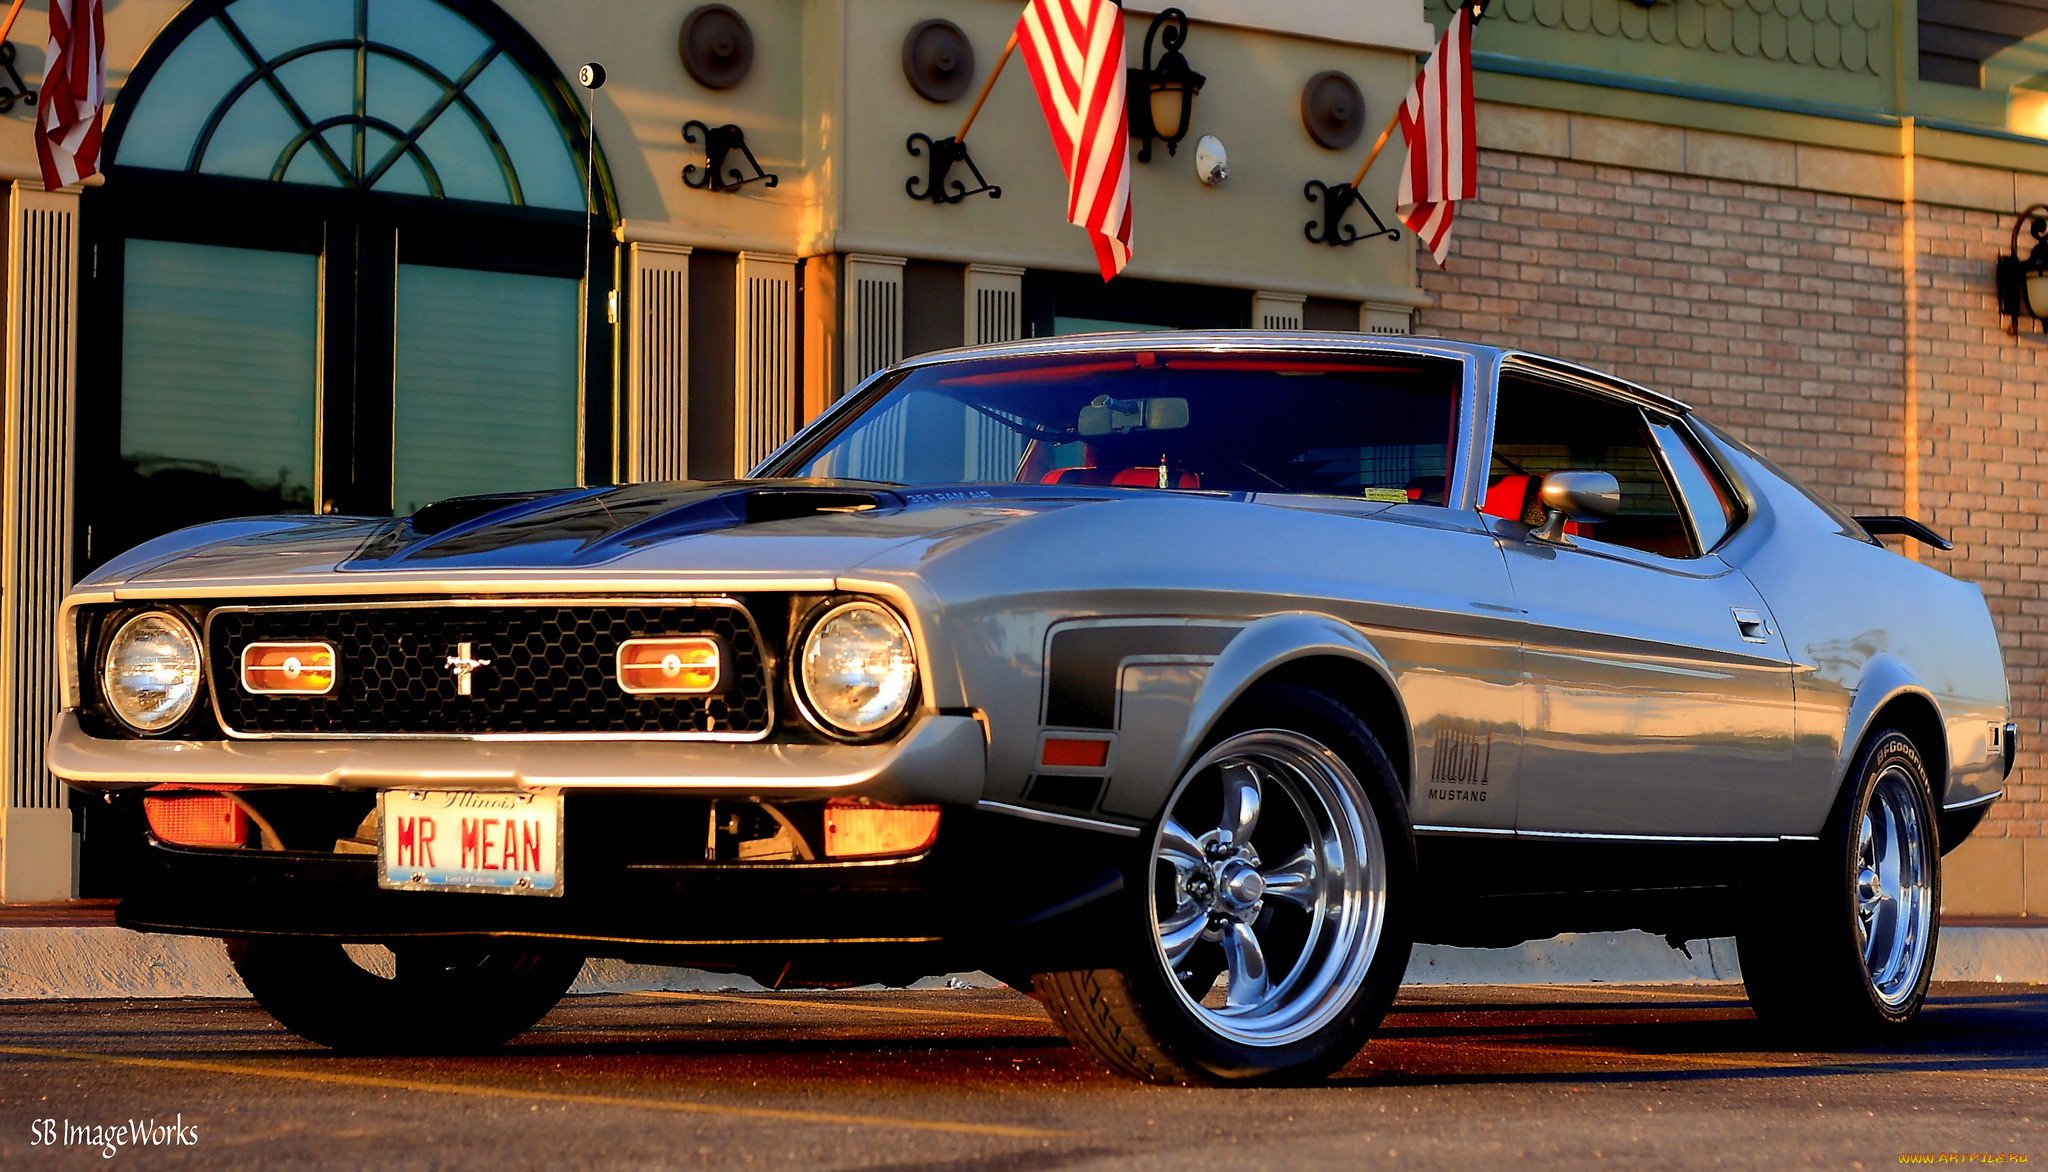 1971 ford mustang, , mustang, ford, 1971